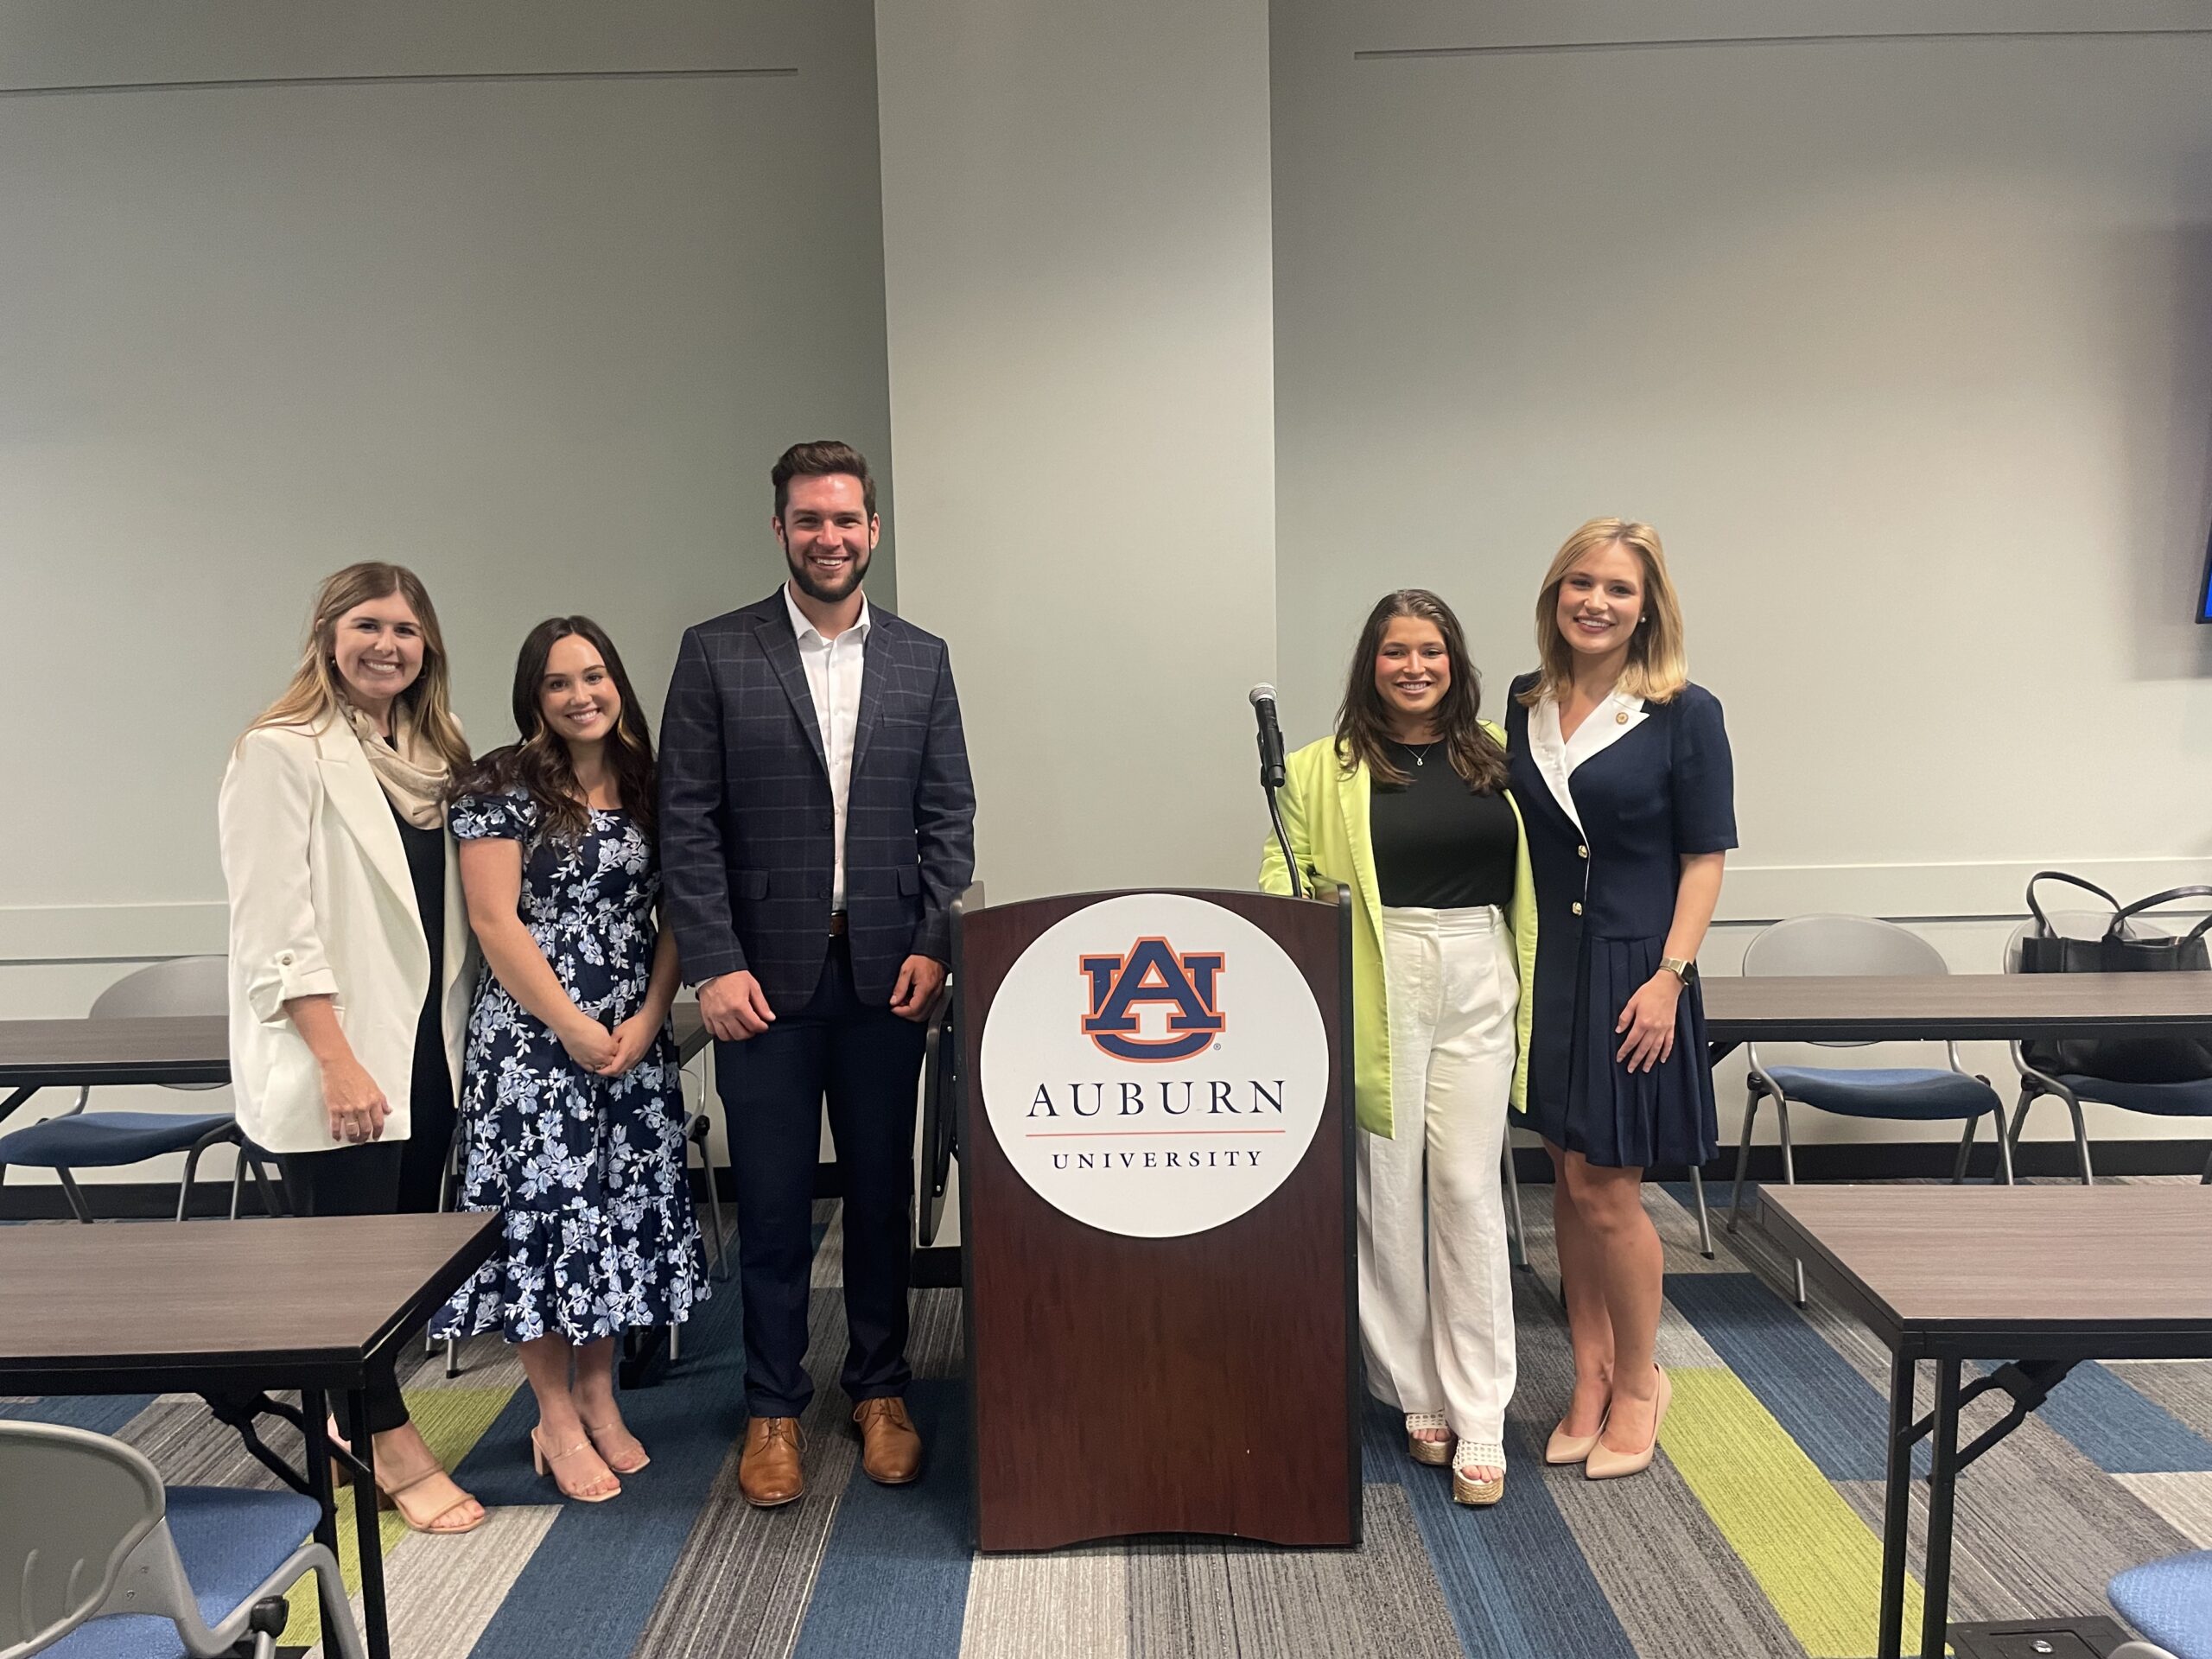 Fall Public Relations Speaker Series Empowers Students